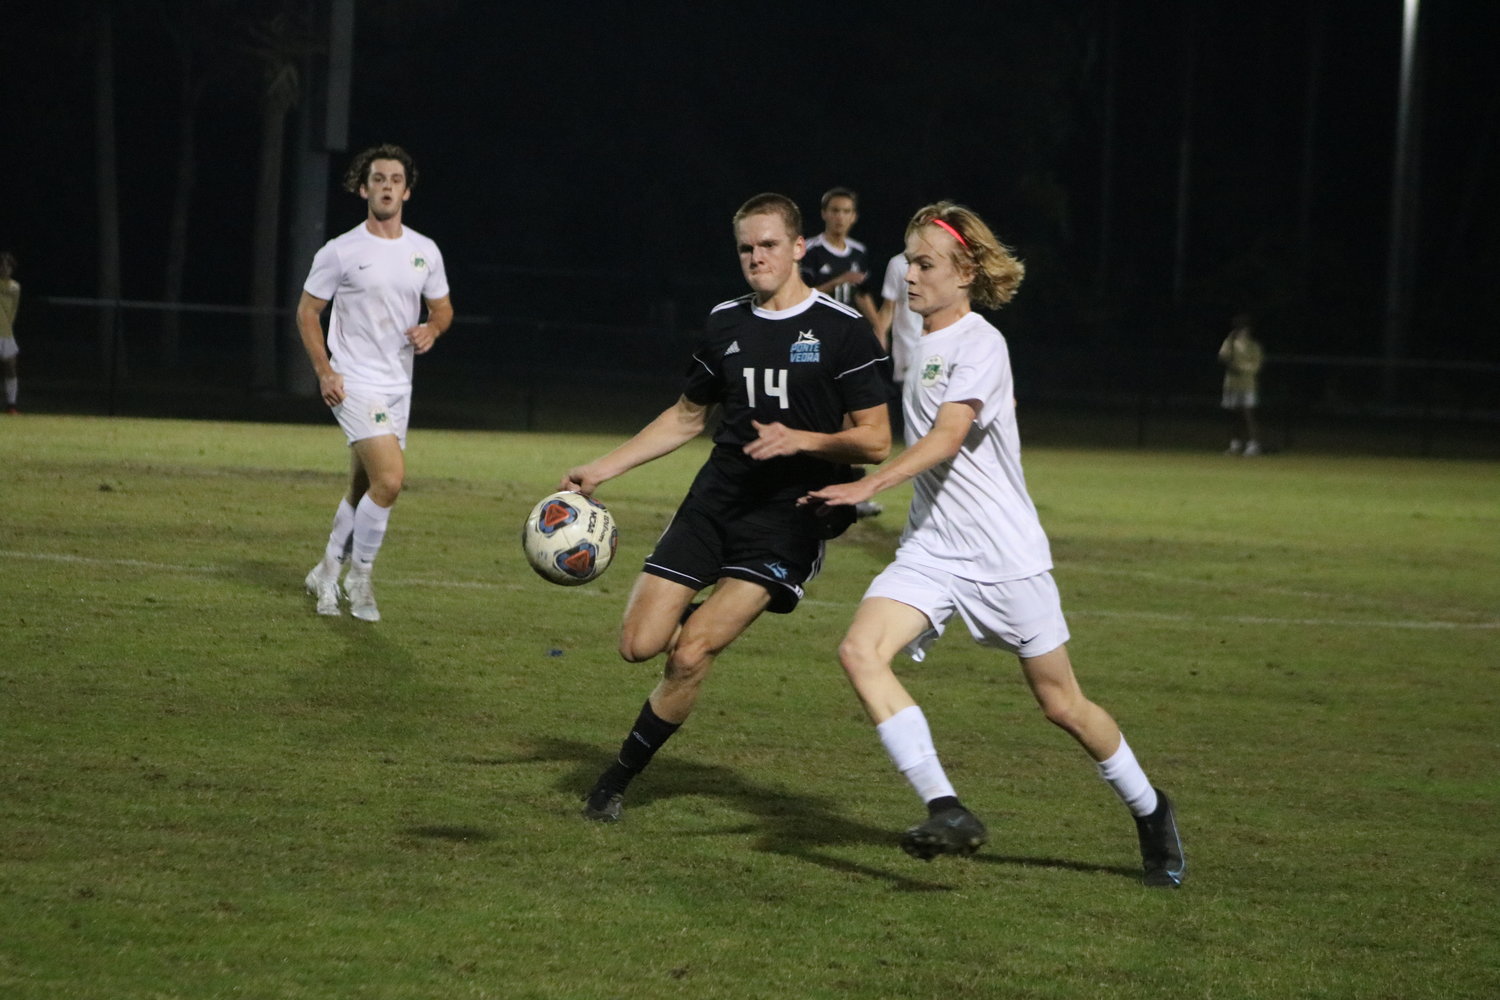 Ponte Vedra’s Cooper Gottfried (No. 14) and Josh Sintich of Nease chase down a ball.